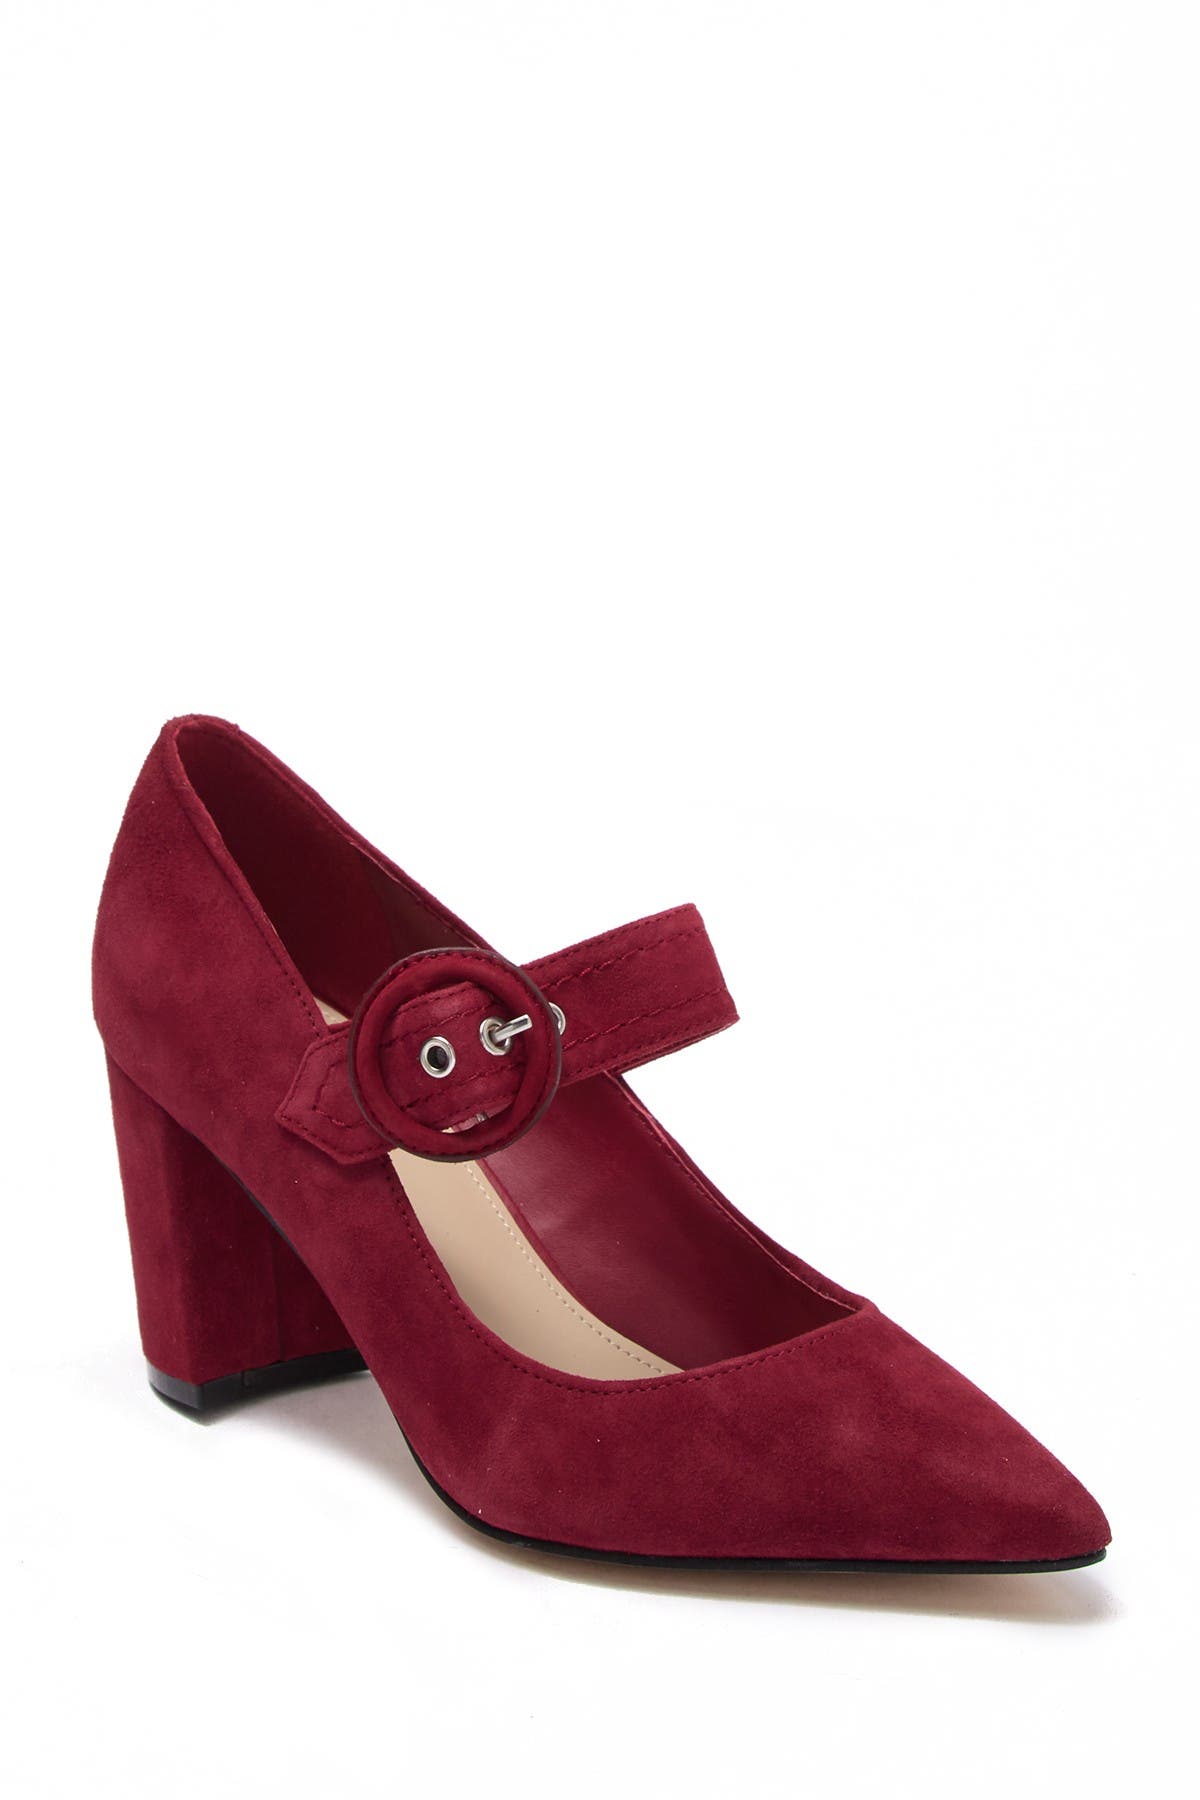 marc fisher red suede pumps